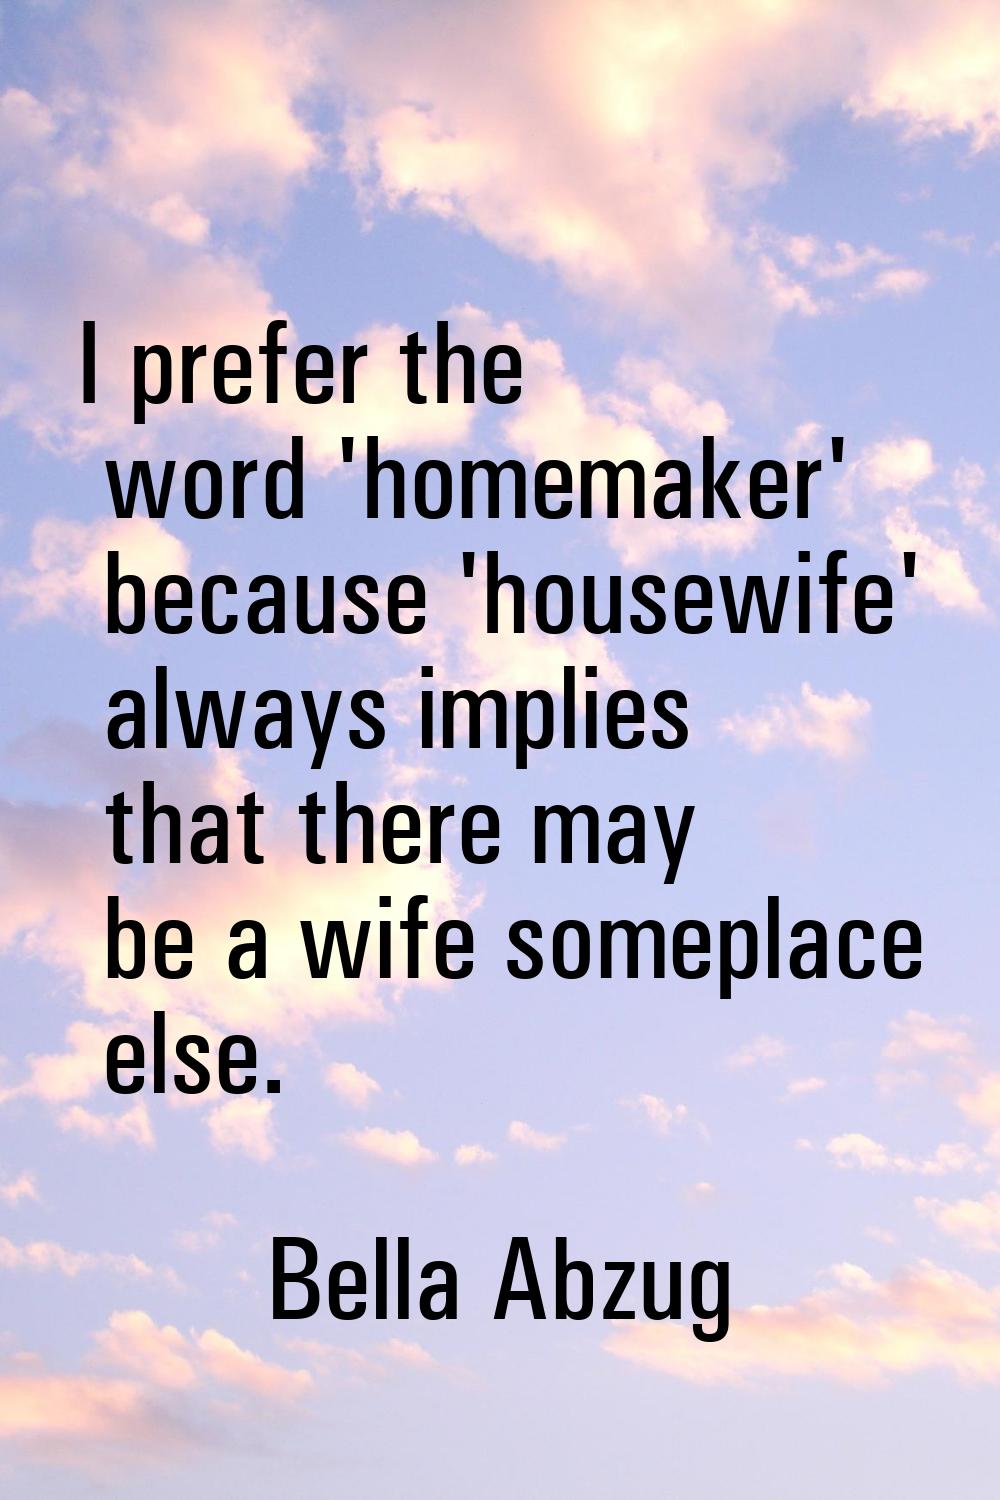 I prefer the word 'homemaker' because 'housewife' always implies that there may be a wife someplace